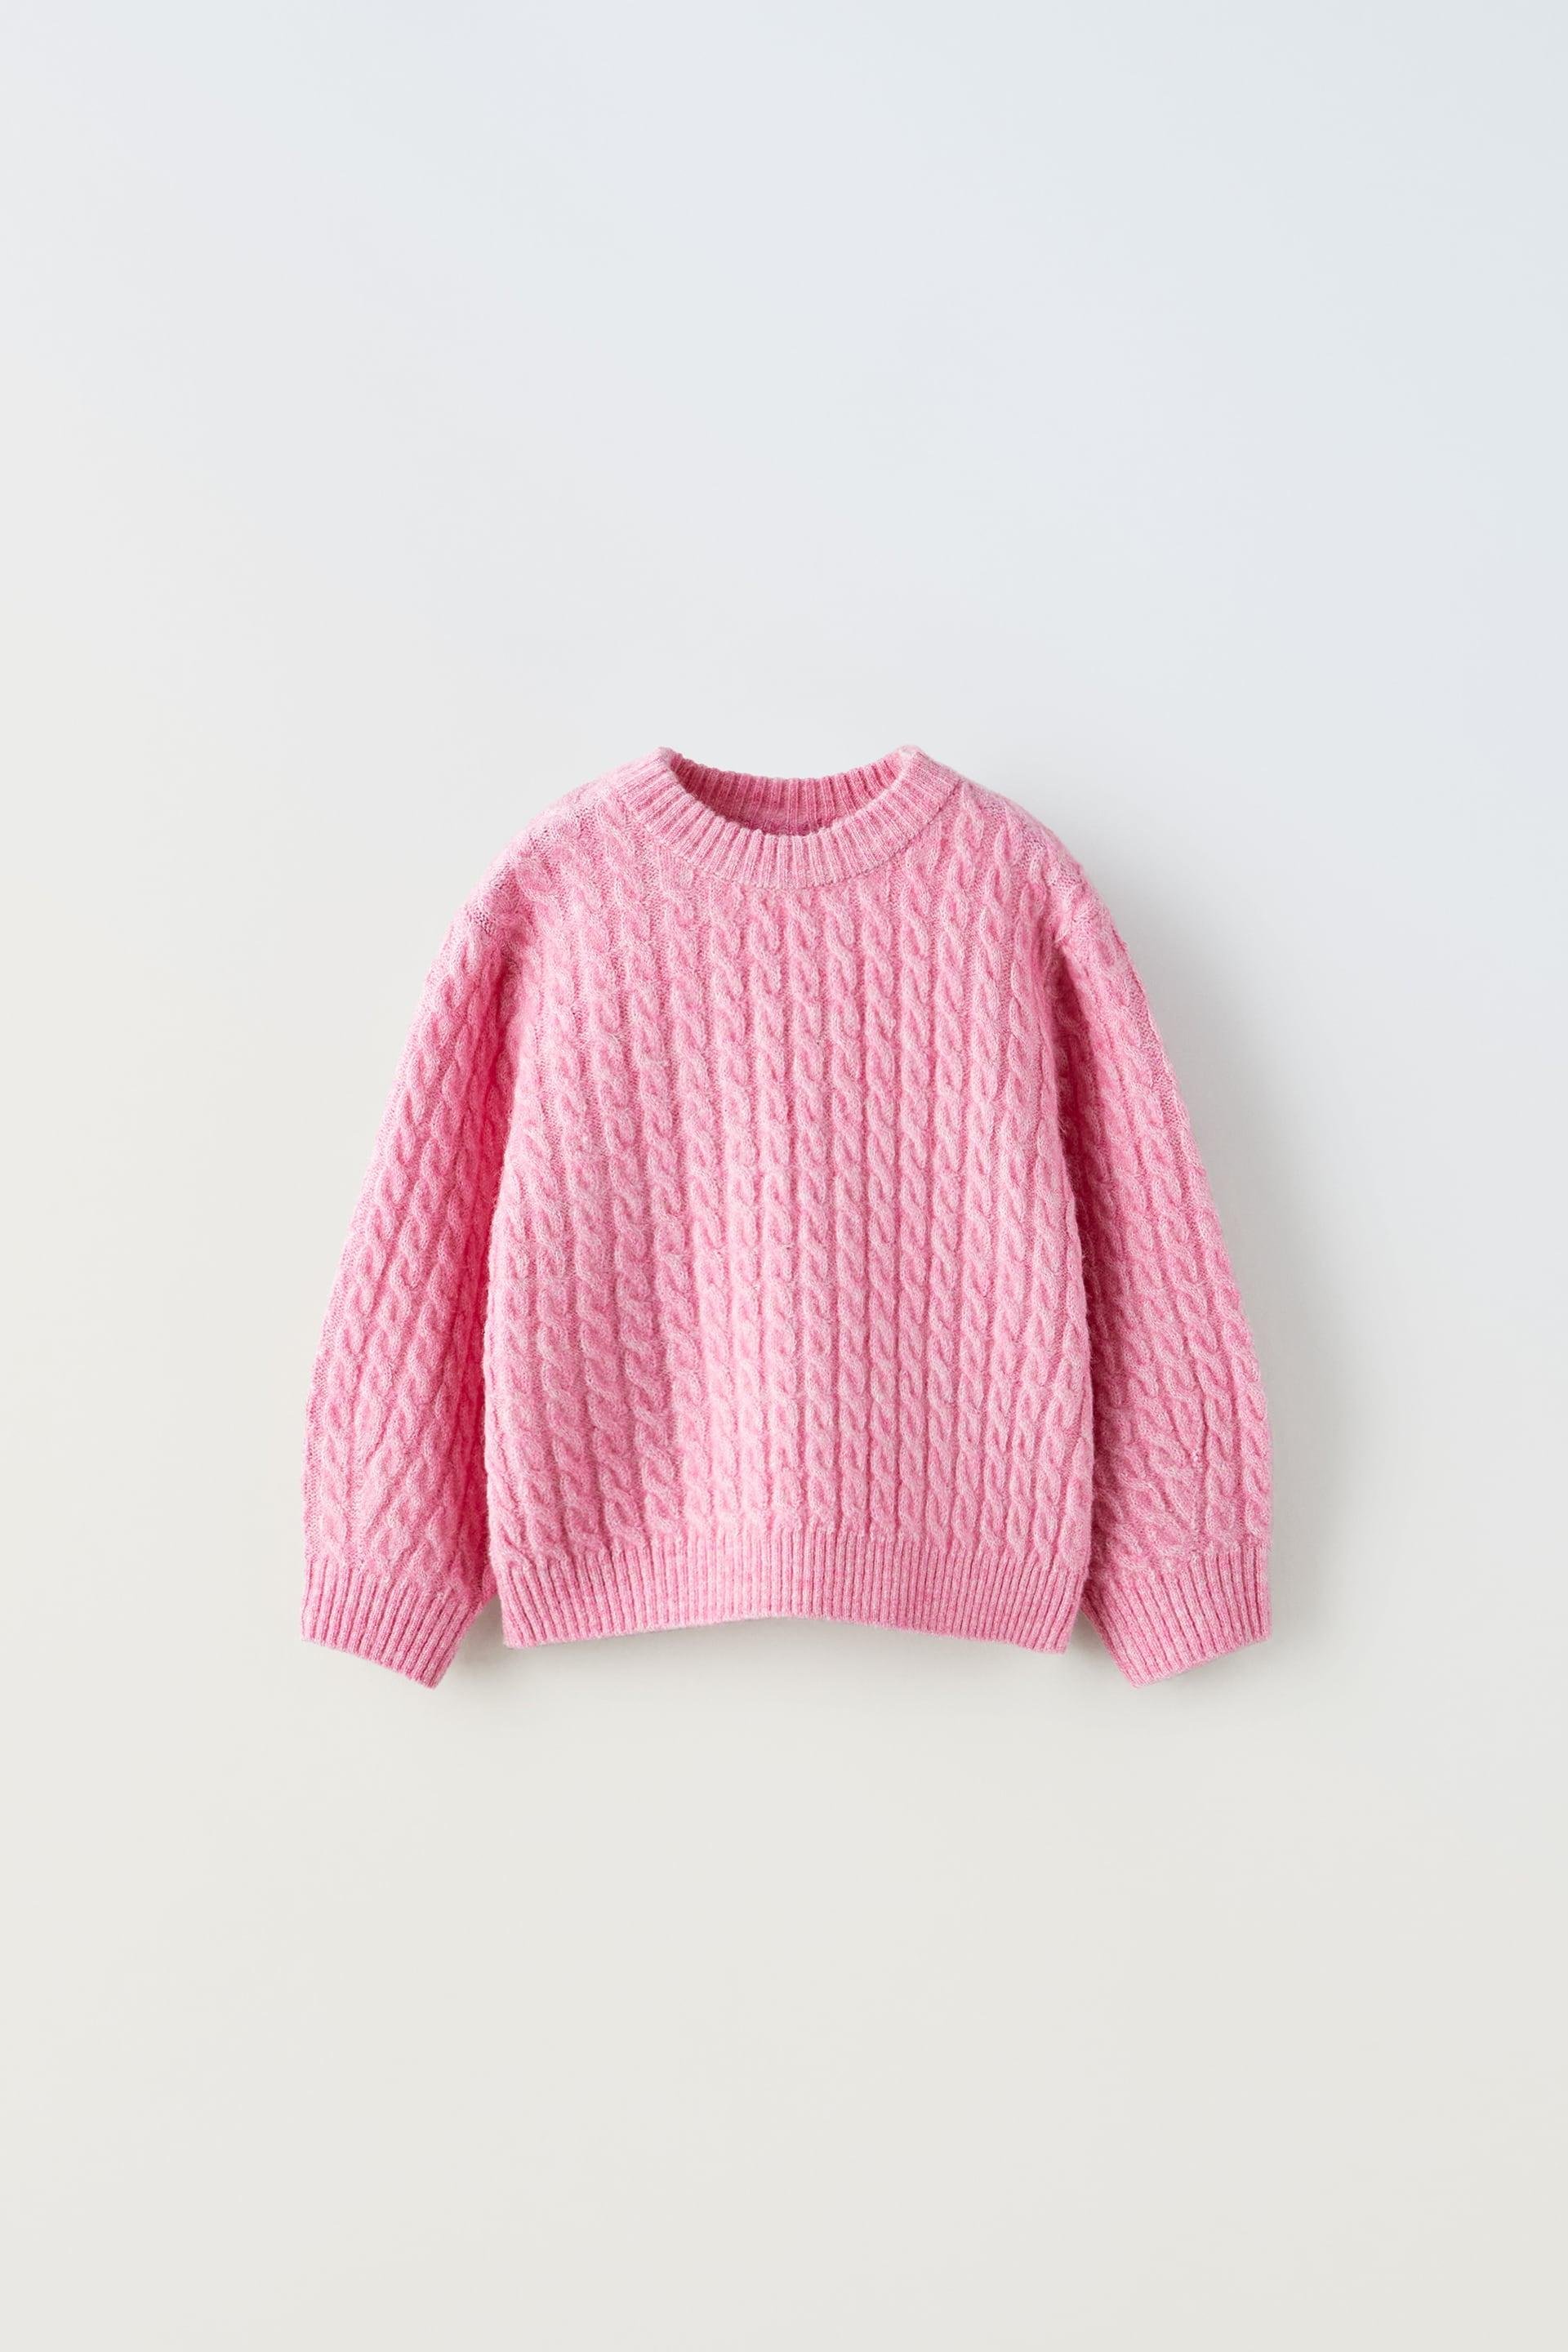 CABLE KNIT SWEATER by ZARA